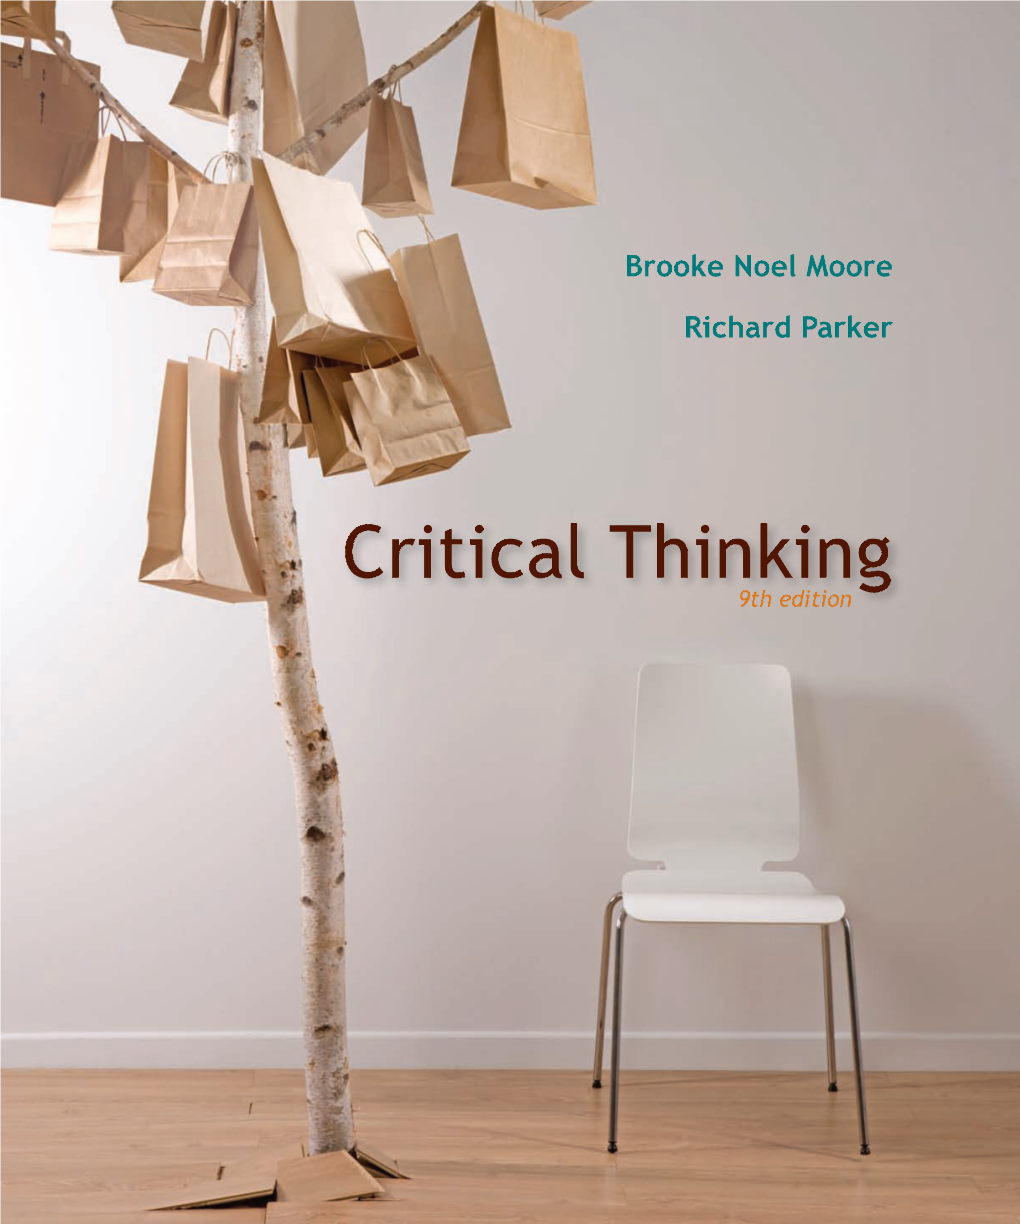 Critical Thinking – Moore / Parker Brooke Noel Moore